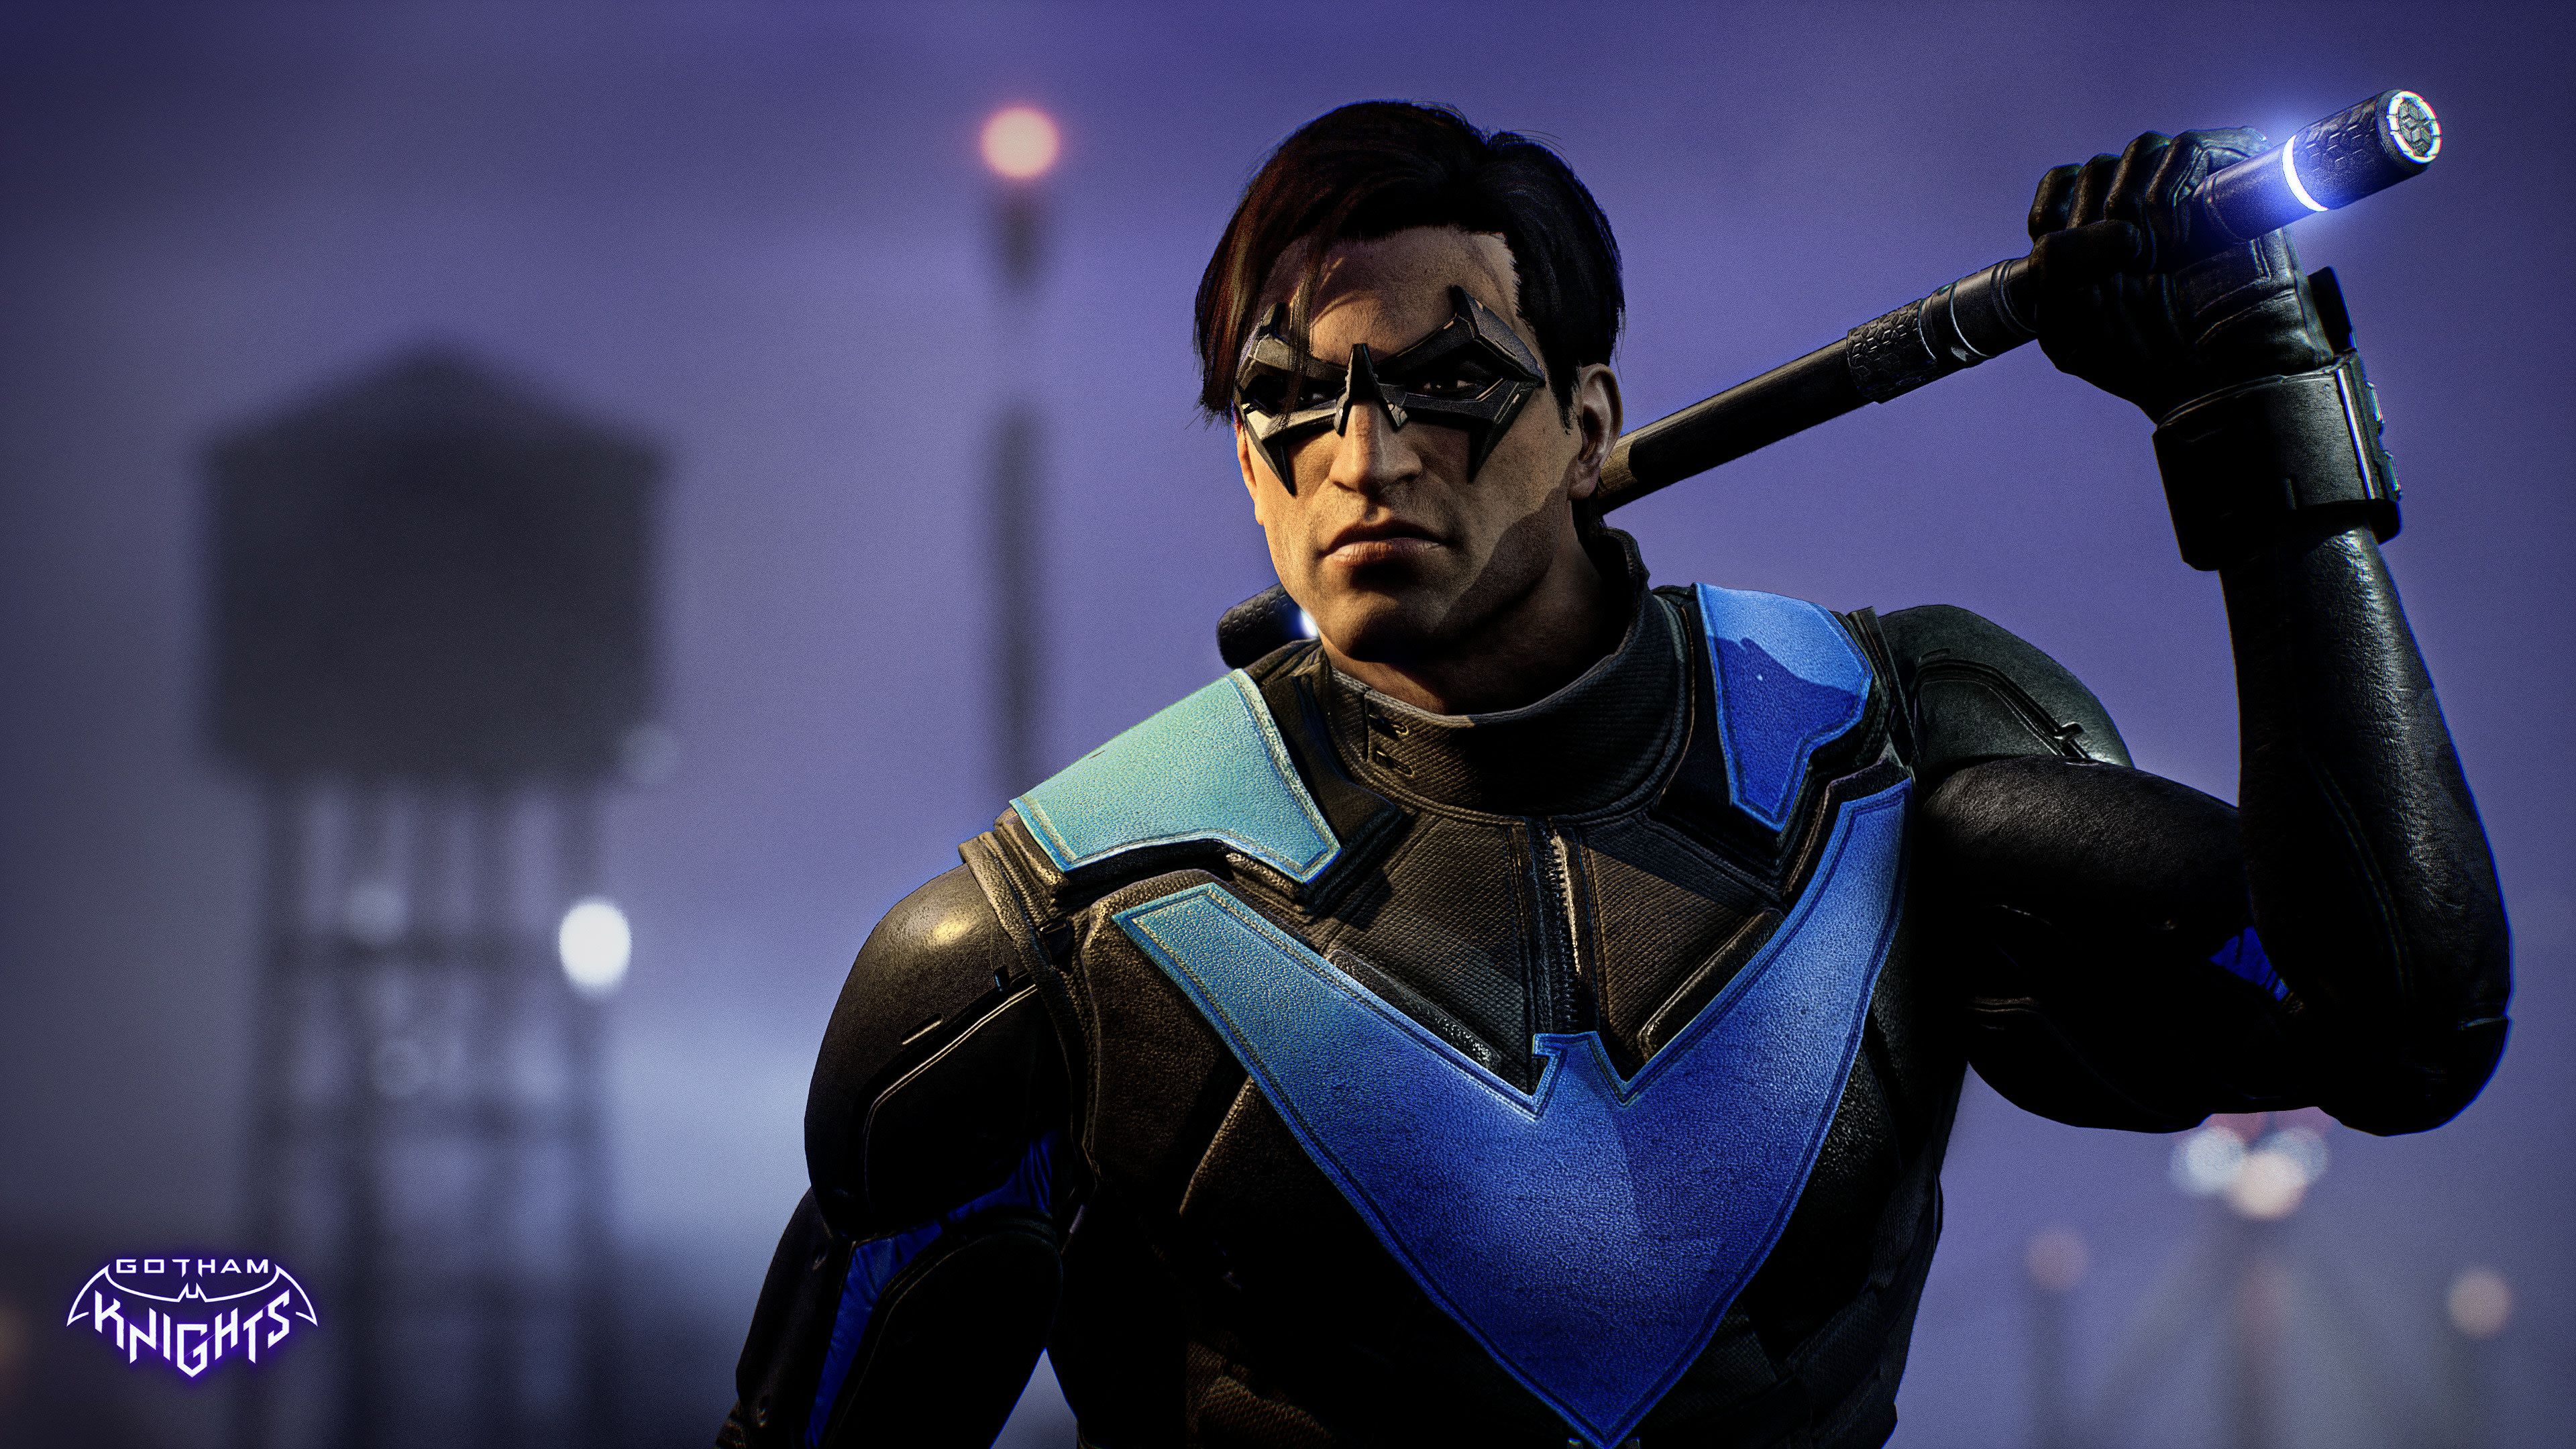 Nightwing HD Wallpapers | 4K Backgrounds - Wallpapers Den